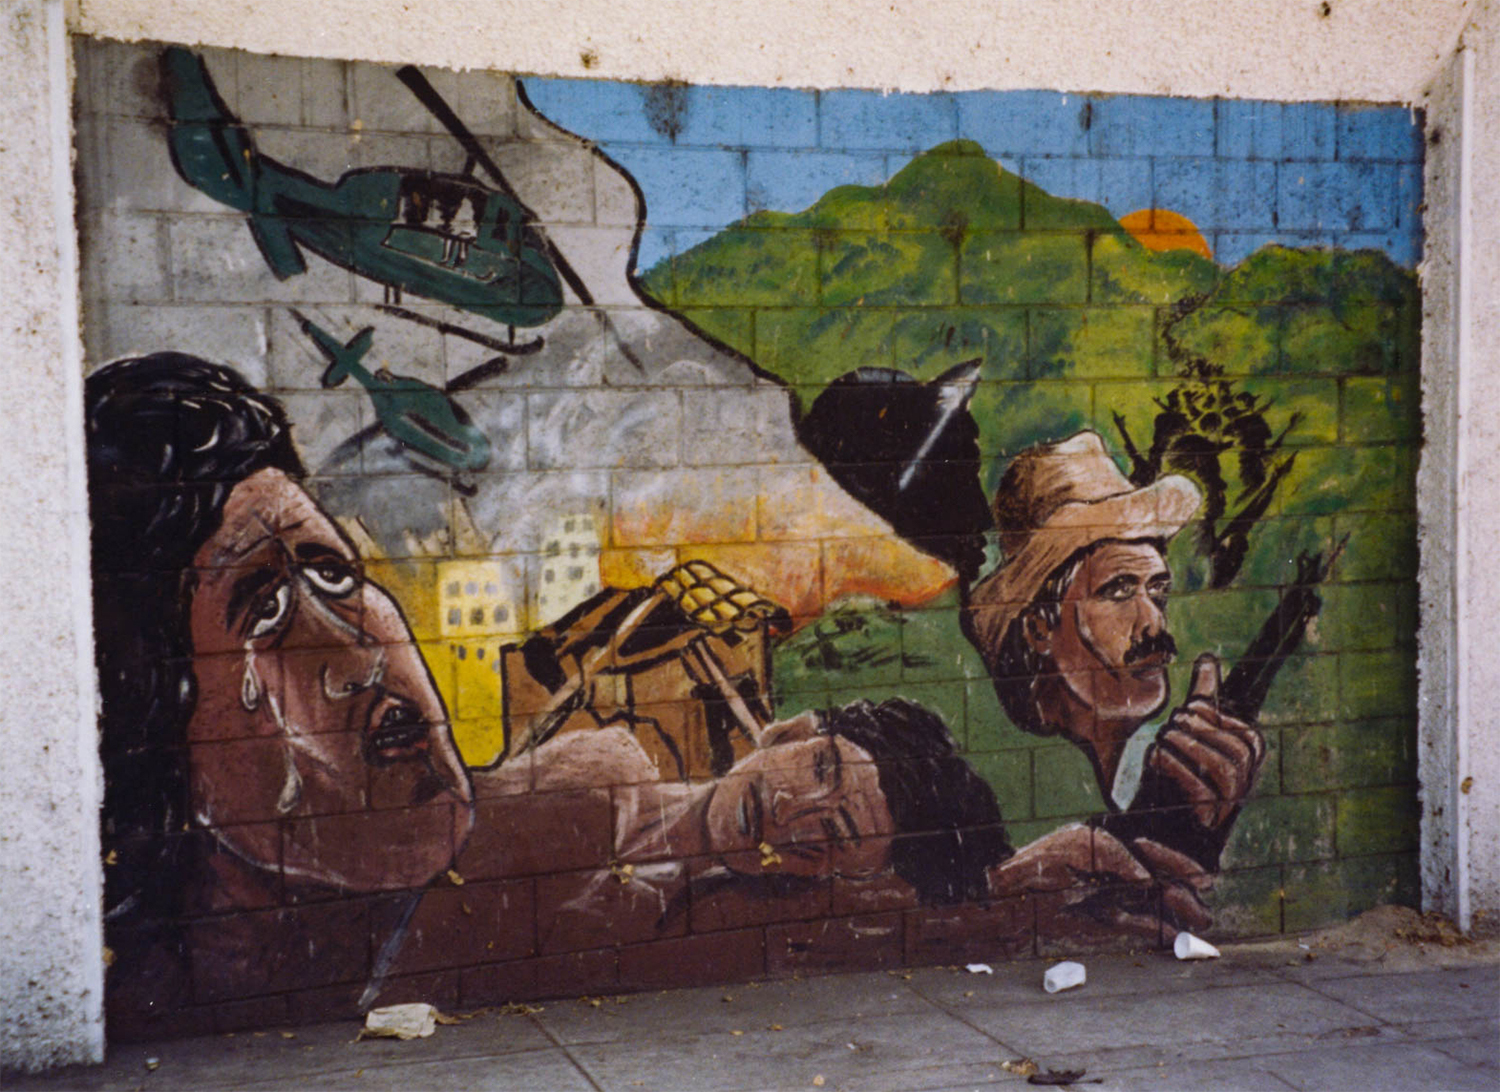 <p>A mural in San Salvador depicts the suffering and scale of the 1979-1992 civil war that had concluded in a peace agreement just a few years earlier.</p>